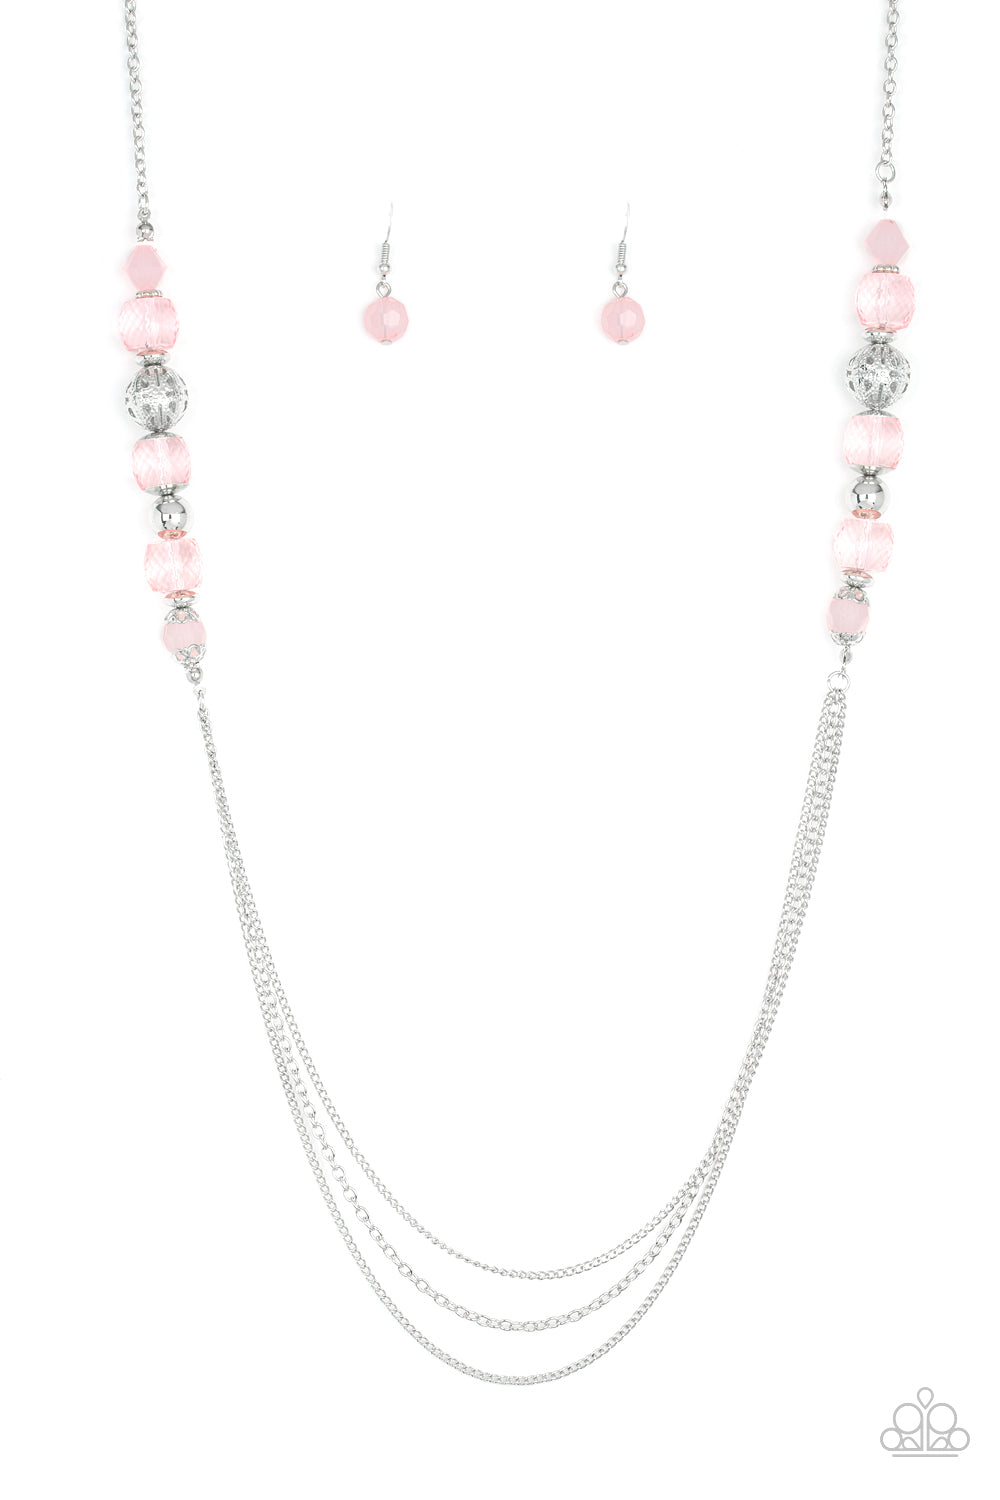 Native New Yorker - pink - Paparazzi necklace